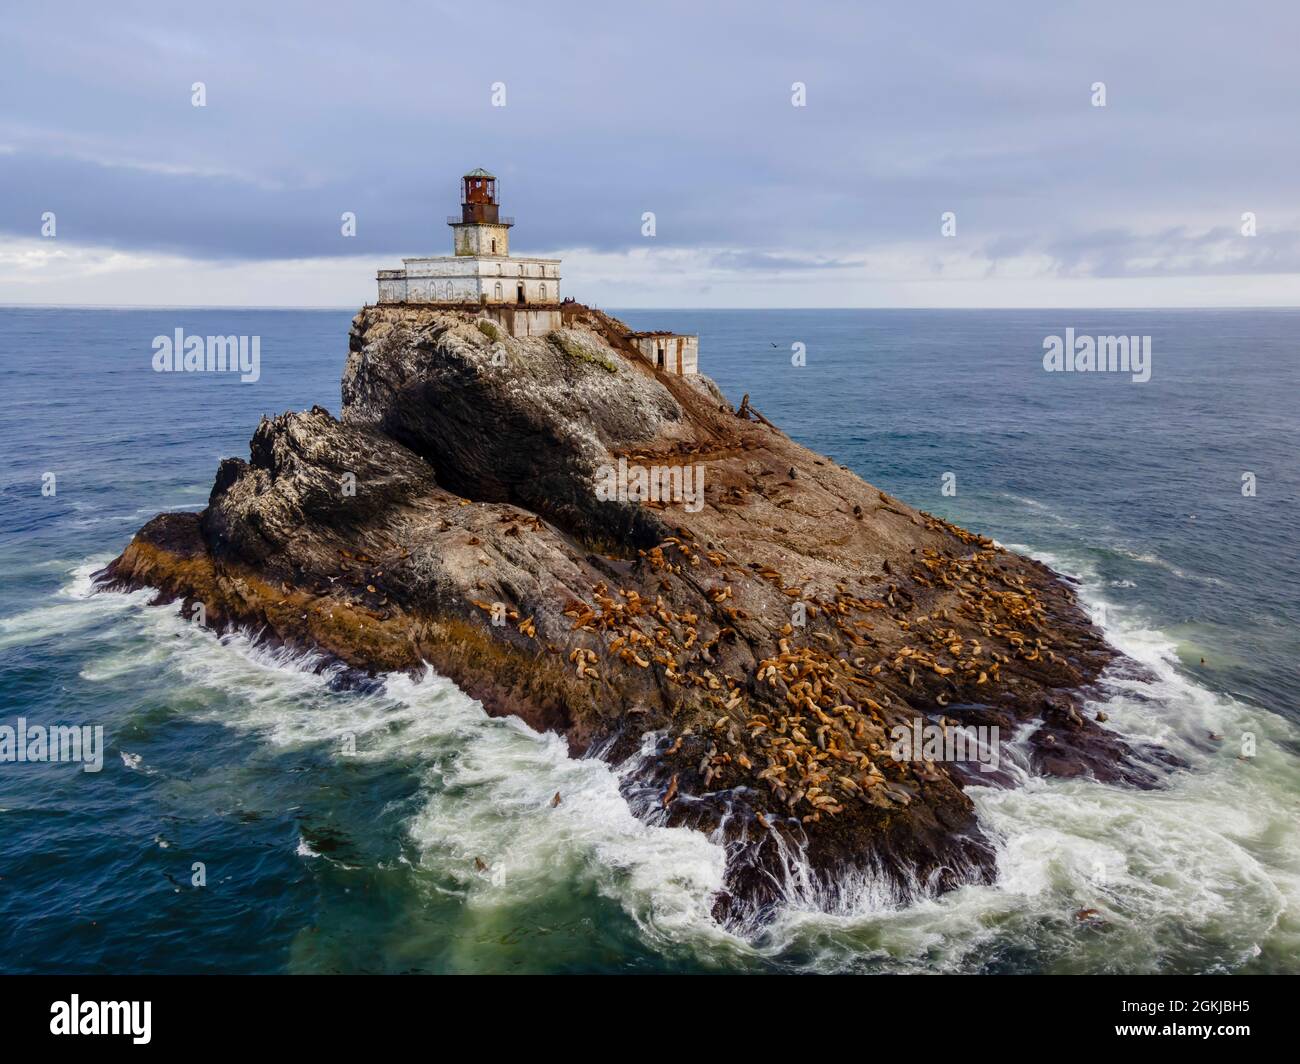 Cannon Beach, Oregon, USA. 10th 2021. Tillamook Rock Light (known locally as Terrible Tilly or just Tilly) is a deactivated lighthouse on the Oregon Coast of the United States. (Credit Image: ©